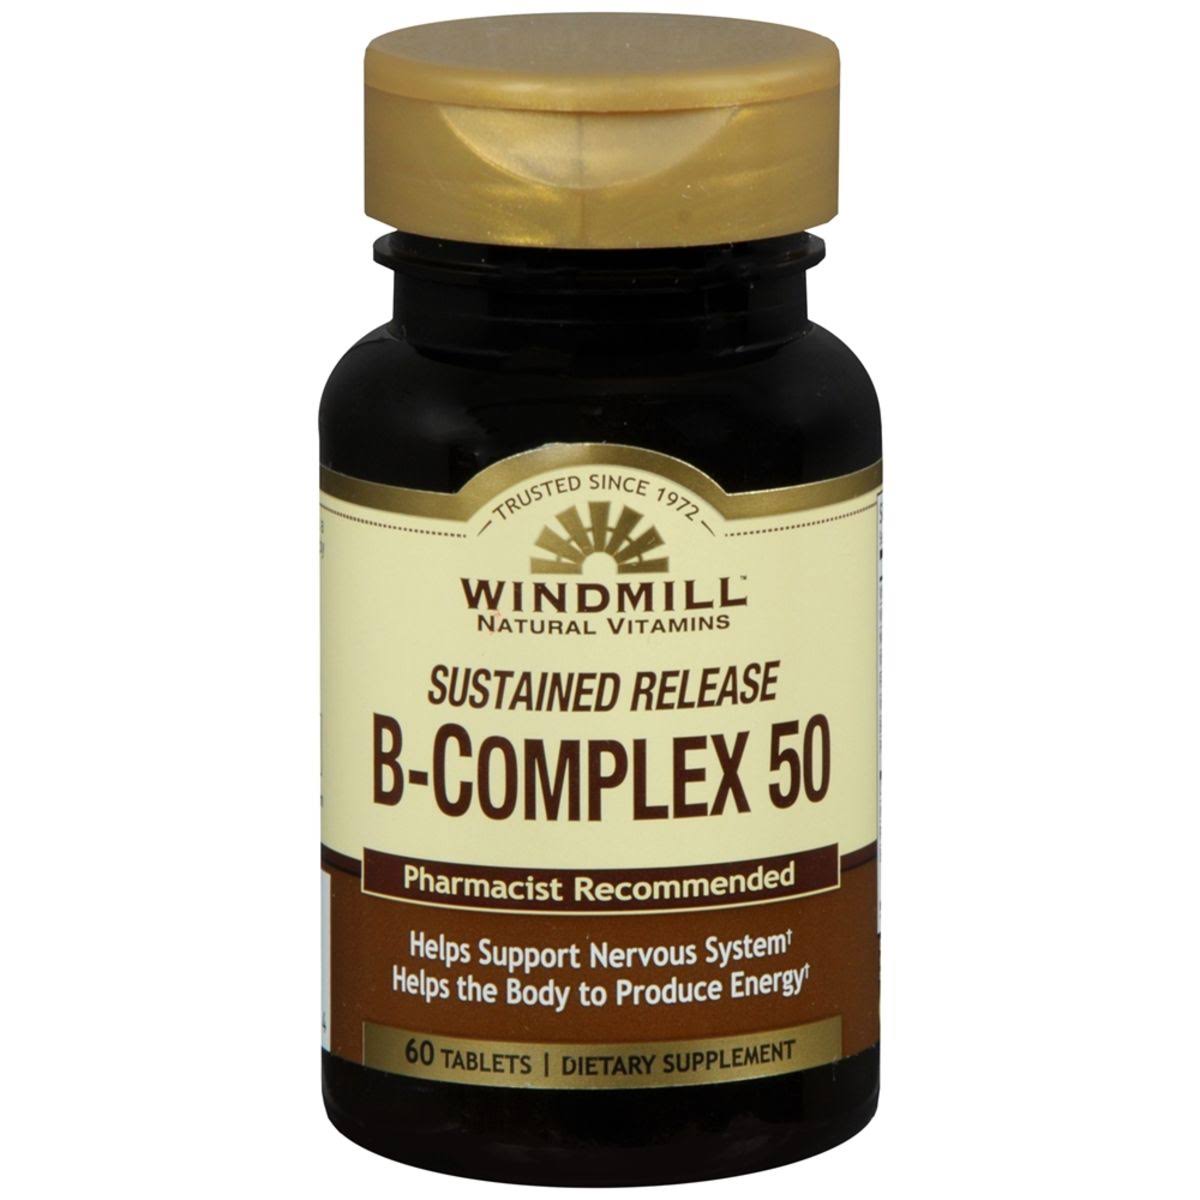 Windmill Vitamin B-Complex Tablets Sustained Release 60 Tablets (Pack